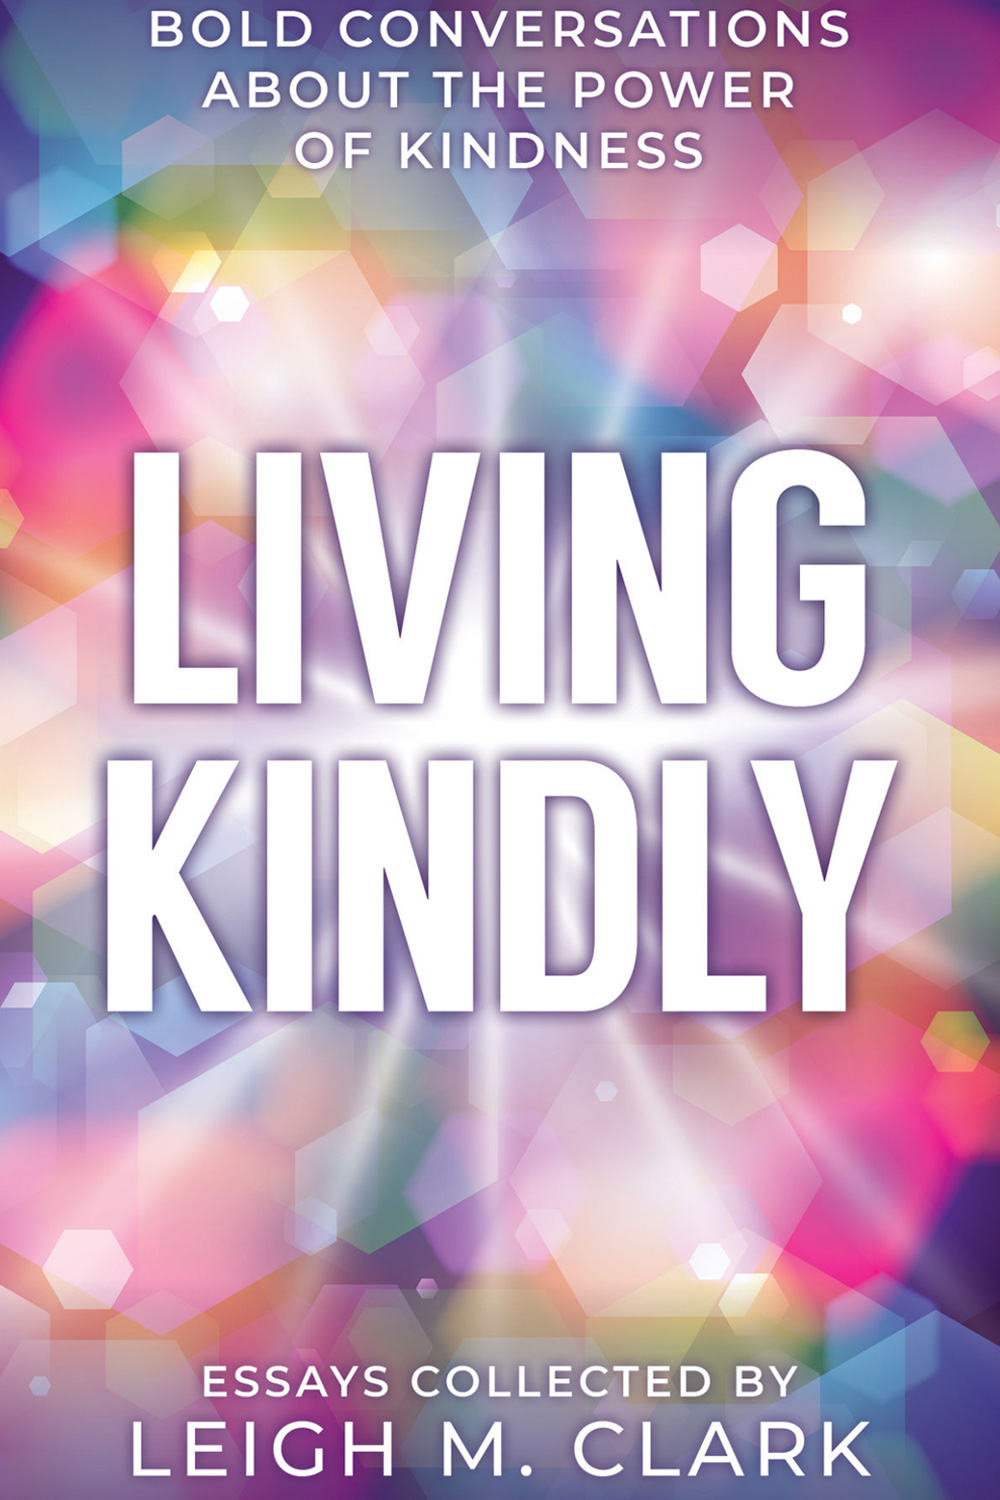 Living Kindly: Bold Conversations about the Power of Kindness